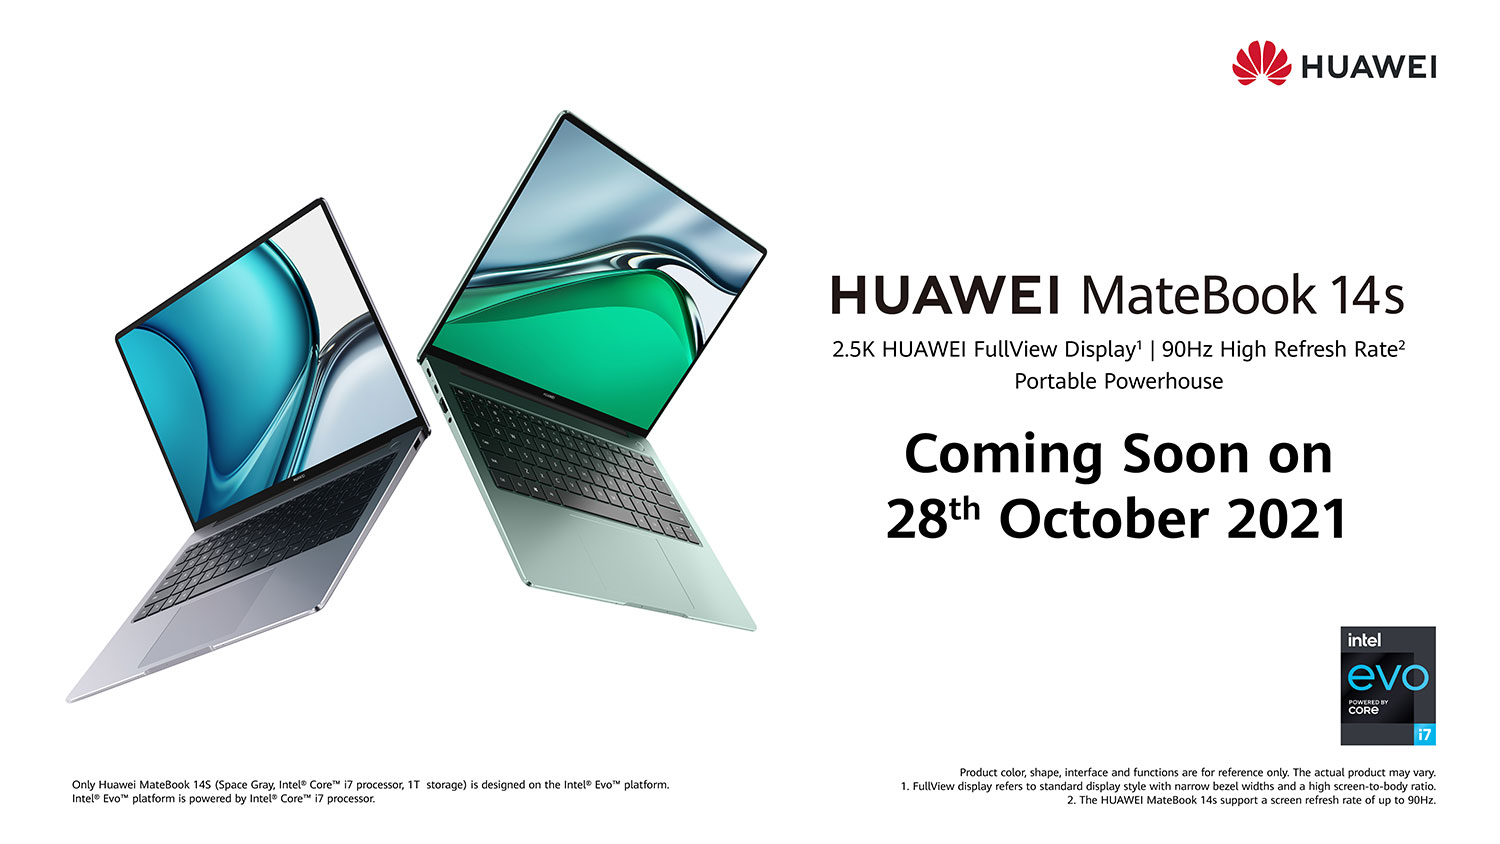 HUAWEI MateBook 14s Coming on October 28